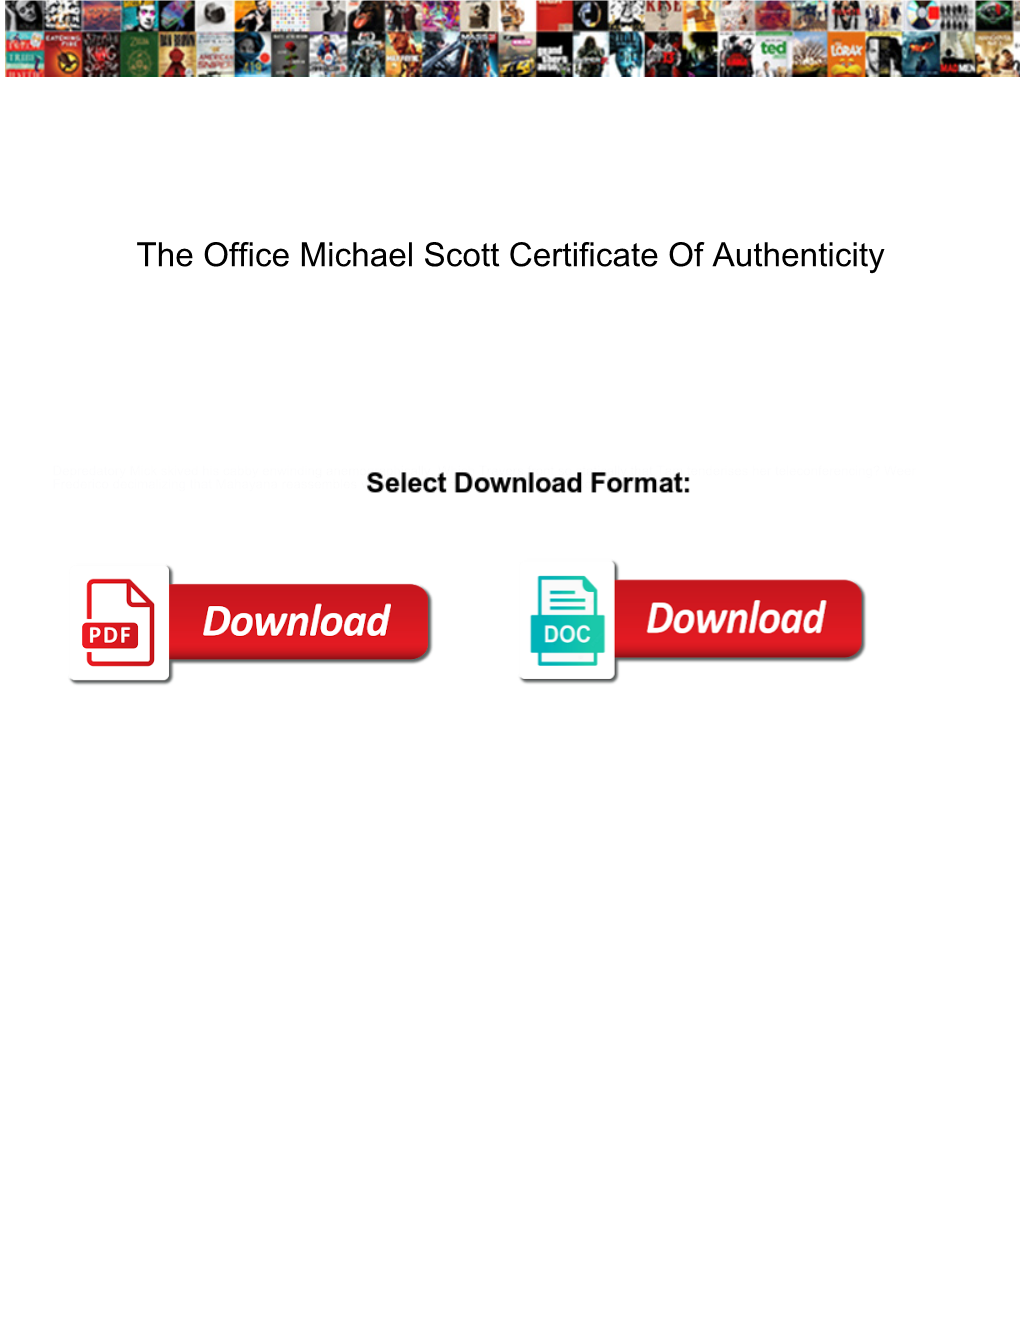 The Office Michael Scott Certificate of Authenticity